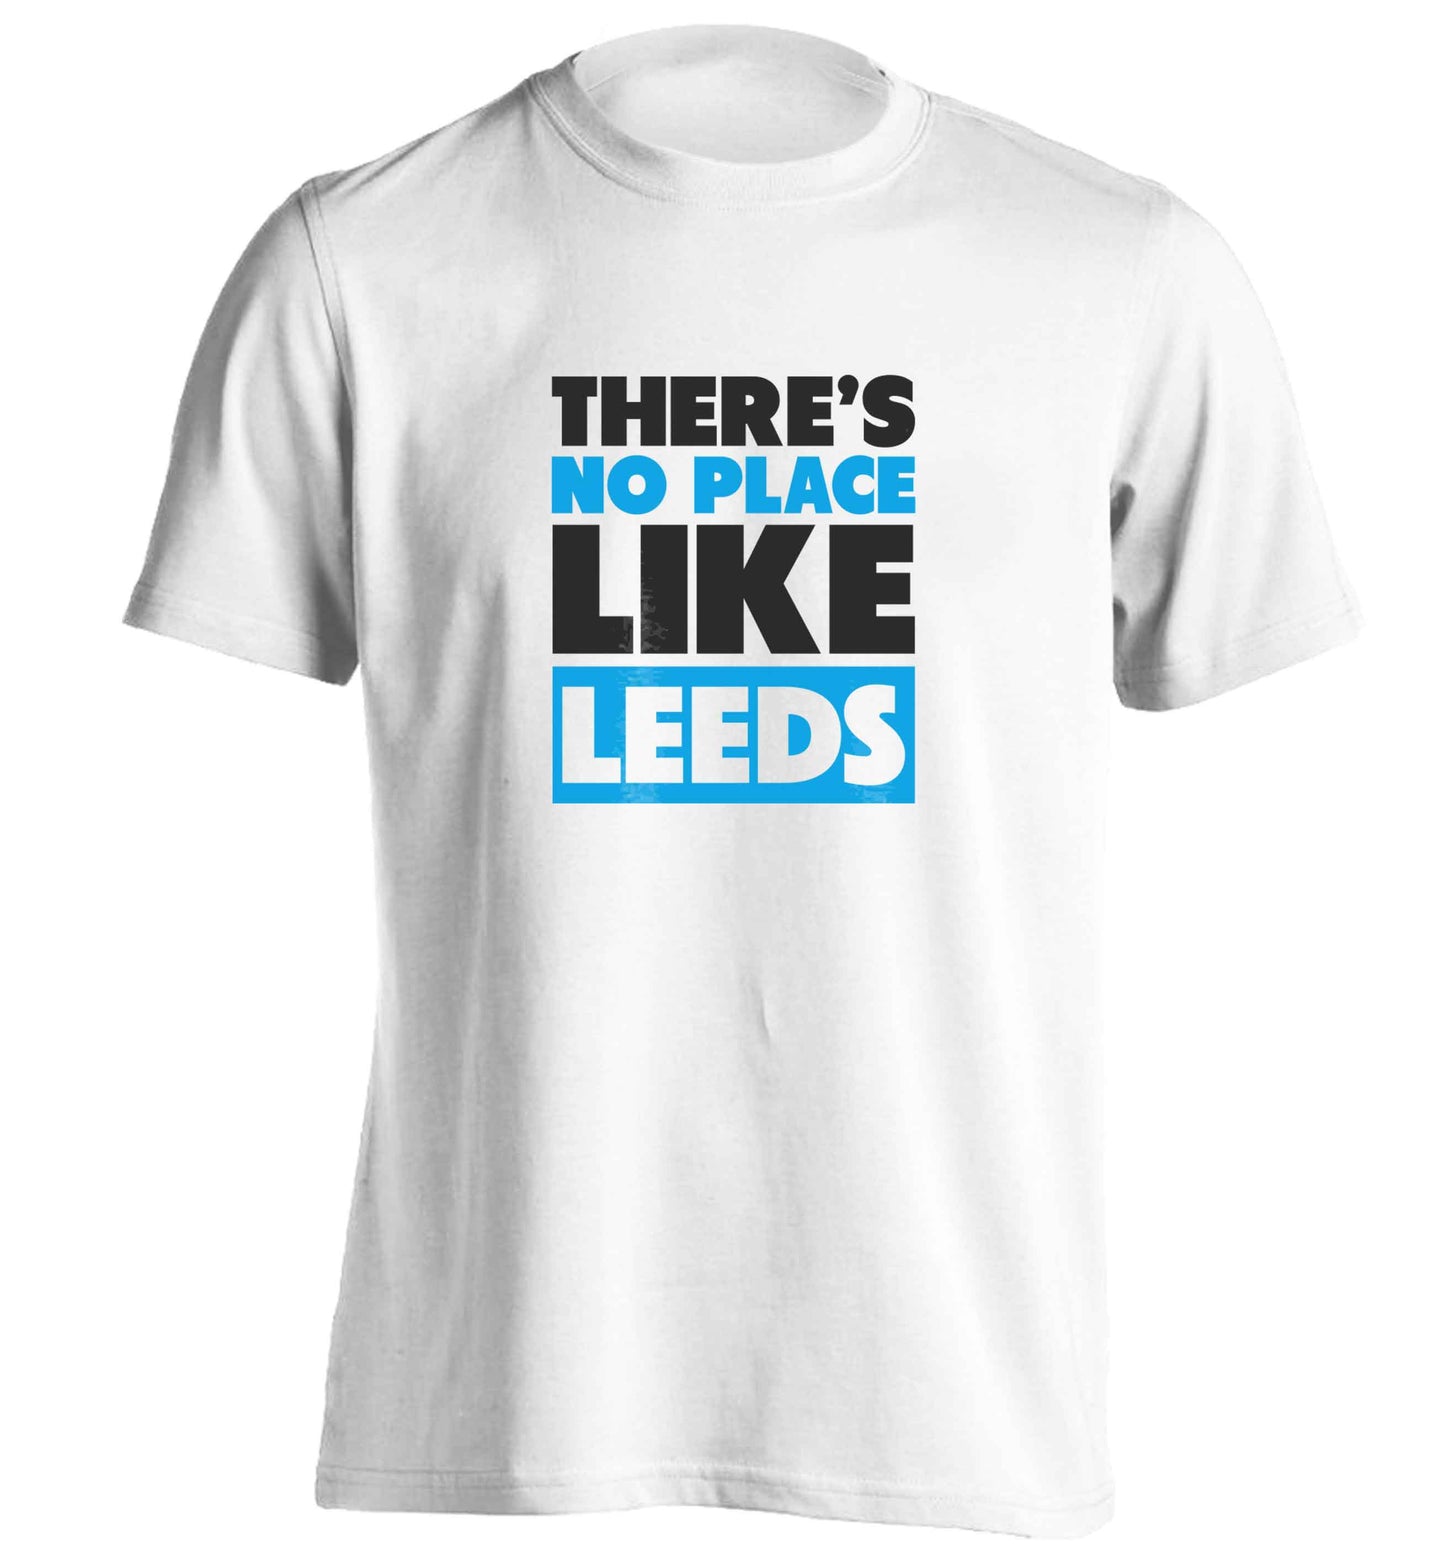 There's no place like Leeds adults unisex white Tshirt 2XL